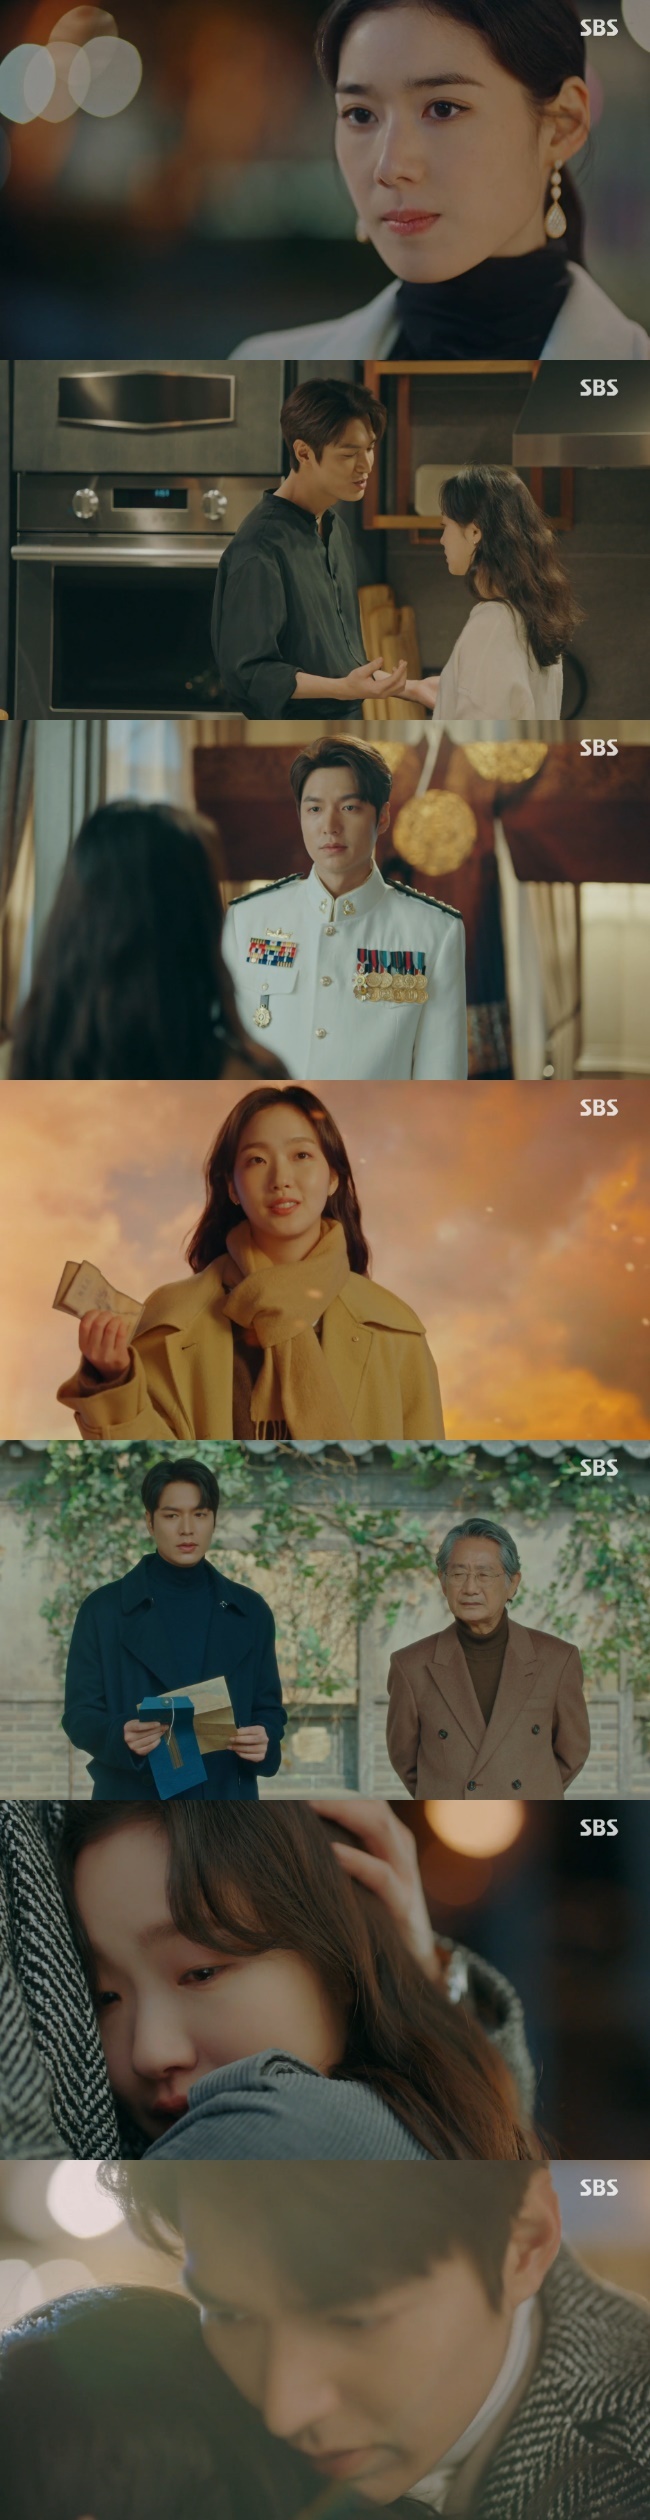 Lee Min-ho realized Lee Jung-jins Earth 2 and sensed the dangers of himself and Kim Go-eun.Lee Min-ho learned Earth 2 of Lee Jung-jin in the 6th episode of SBSs Golden Land Drama The King: The Monarch of Eternity (playplayed by Kim Eun-sook/directed by Baek Sang-hoon and Jung Ji-hyun) broadcast on May 2.Guseo-ryeong visited Igon after receiving a report that Igon had turned a helicopter to Seoul late at night.He introduced himself as a fan of the prime minister, wary of the old Seo-ryeong (Mr. Chung Eun-chae), who says, Your Majesty is my country.I am a traveler, and it is an honor to see you like this. I will leave soon. It is the first Korean Empire, so everything is like a fairy tale, he said.Lee went back to Busan with his jungtae, and Koo Seo-ryong showed jealousy when he saw Lee, who laughed because of his jungtae in front of him.Lee made food for himself for the situation that he did not eat properly.Igon, who knew that the monetary unit was different, but he did not pay for it because he would go far, but said, I was lonely when I was alone today.Its pretty hard to say that I cant prove myself. Thanks for picking me up.Lee searched Lee Jung-jin and hesitated when Jung Tae-eul, who learned about his life, asked him to show his identity document.Jung Tae-eul, who received the Identity document after worrying, was hard to believe that he had his Identity document 25 years ago.Someone spilled, and the memory became blurred. I dont know if I can recognize him, but I feel like Ill show up for once.Its hard to solve, but its a simple and beautiful way to do it. Youre the answer Im looking for.Whoever it was and whoever World won, so dont say good-bye to yourself.At that time, as Japan approached the territorial waters with Aegis, the NSC was called up.Despite the opposition of the lawmakers, the old army was ready for battle, and Igon was a naval captain and a commander of the Korean Empire.The Imperial Court wears uniforms at the most honorable moment, Lee said, handing Jung Tae-eul the Identity document. Ill win. Ill be right back.Will you wait? He nodded and said, Ill see you again. Igon said, I thought it was a name I did not call, but it was a name I only asked you to call.While Jung Tae-eul was returning to South Korea to concentrate on his work, Korean Empire and Japans Arlington Road had a fierce confrontation.Japan Arlington Road was close to a position that could be identified by the naked eye, and Igon warned his comrades that it is not me that you have to protect, but this sea, he warned.Japan was embarrassed by the decisive attitude of Igon, who was prepared for war, and retreated after making a decision to suspend the warship.When Jeong Tae-eul returned to South Korea, he thought of Egon without knowing it. He asked Egon, who kissed him, Take off your clothes. Do you have a shoulder wound? Is it strange?I cant see it now anyway, said Lee, who was actively playing with him to unbutton his clothes. I checked it because I didnt want to write it back.I am sleepy, he said, and Igon regretted the behavior of Jeong Tae-eun, who did not break down the wall, saying, It is harder to cross this line than other Worlds. Yi Jong-in (played by Jeon Mu-song) returned from the conference, and Yi Jong-in held out a book of examination with the true sign of Yirim.Yi Jong-in reveals the true cause of death as a cervical fracture, not a shooting by the Guard, and it is clear that he knew the same body but congenital polio, including fingerprints and blood types.When Irim found out that Irim was alive, Igon sensed anxiety, saying, If Irim wanted from the beginning, I would come to find my class.Lee Ha-na